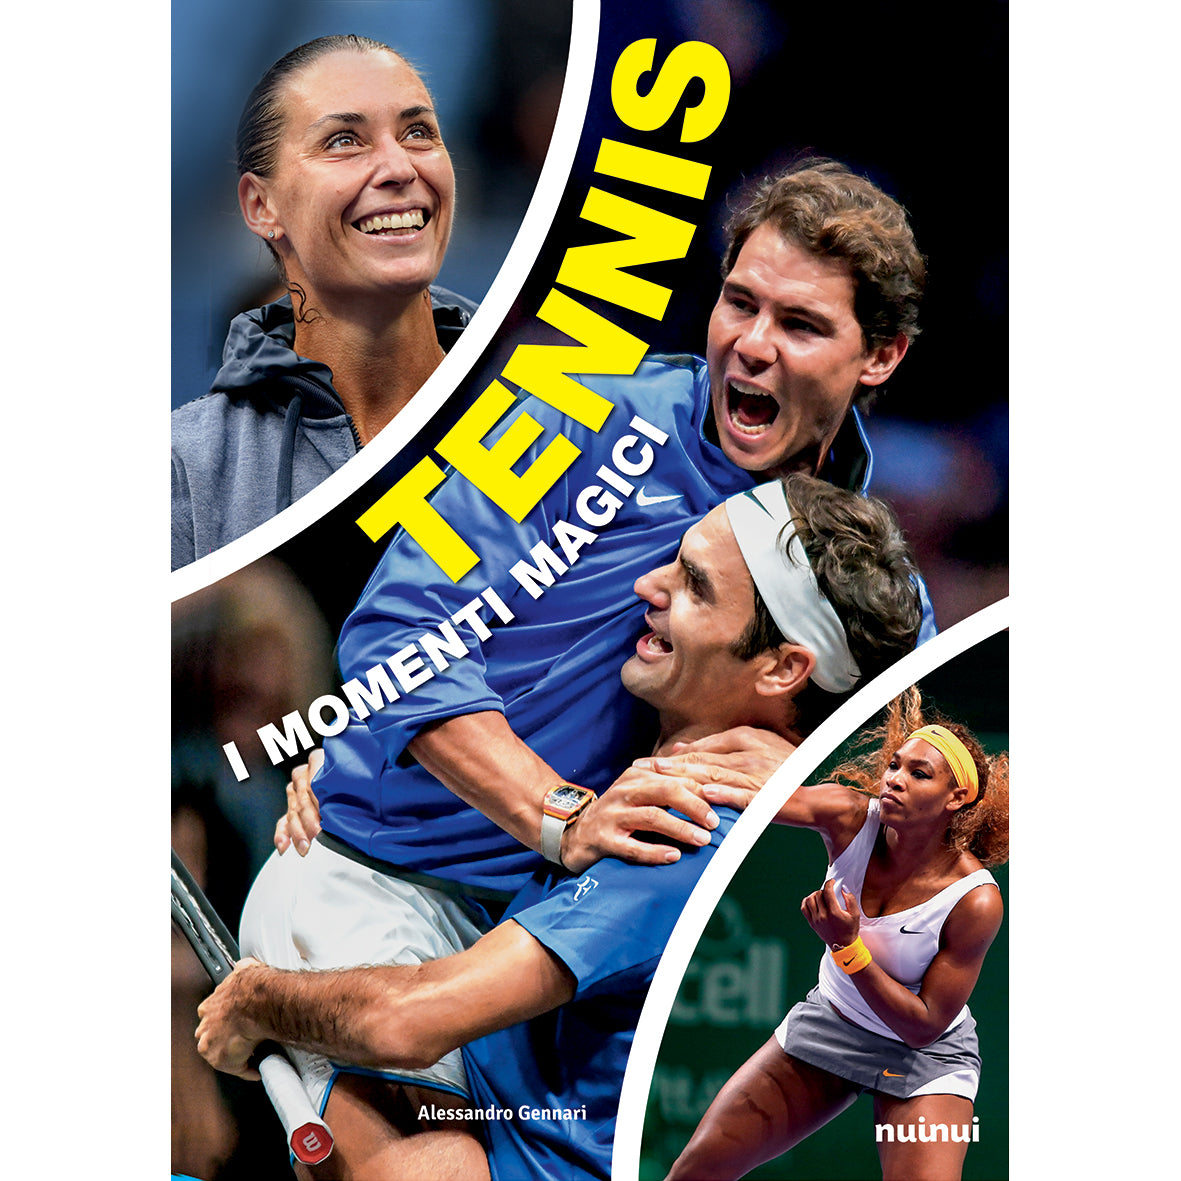 Tennis - The magical moments 